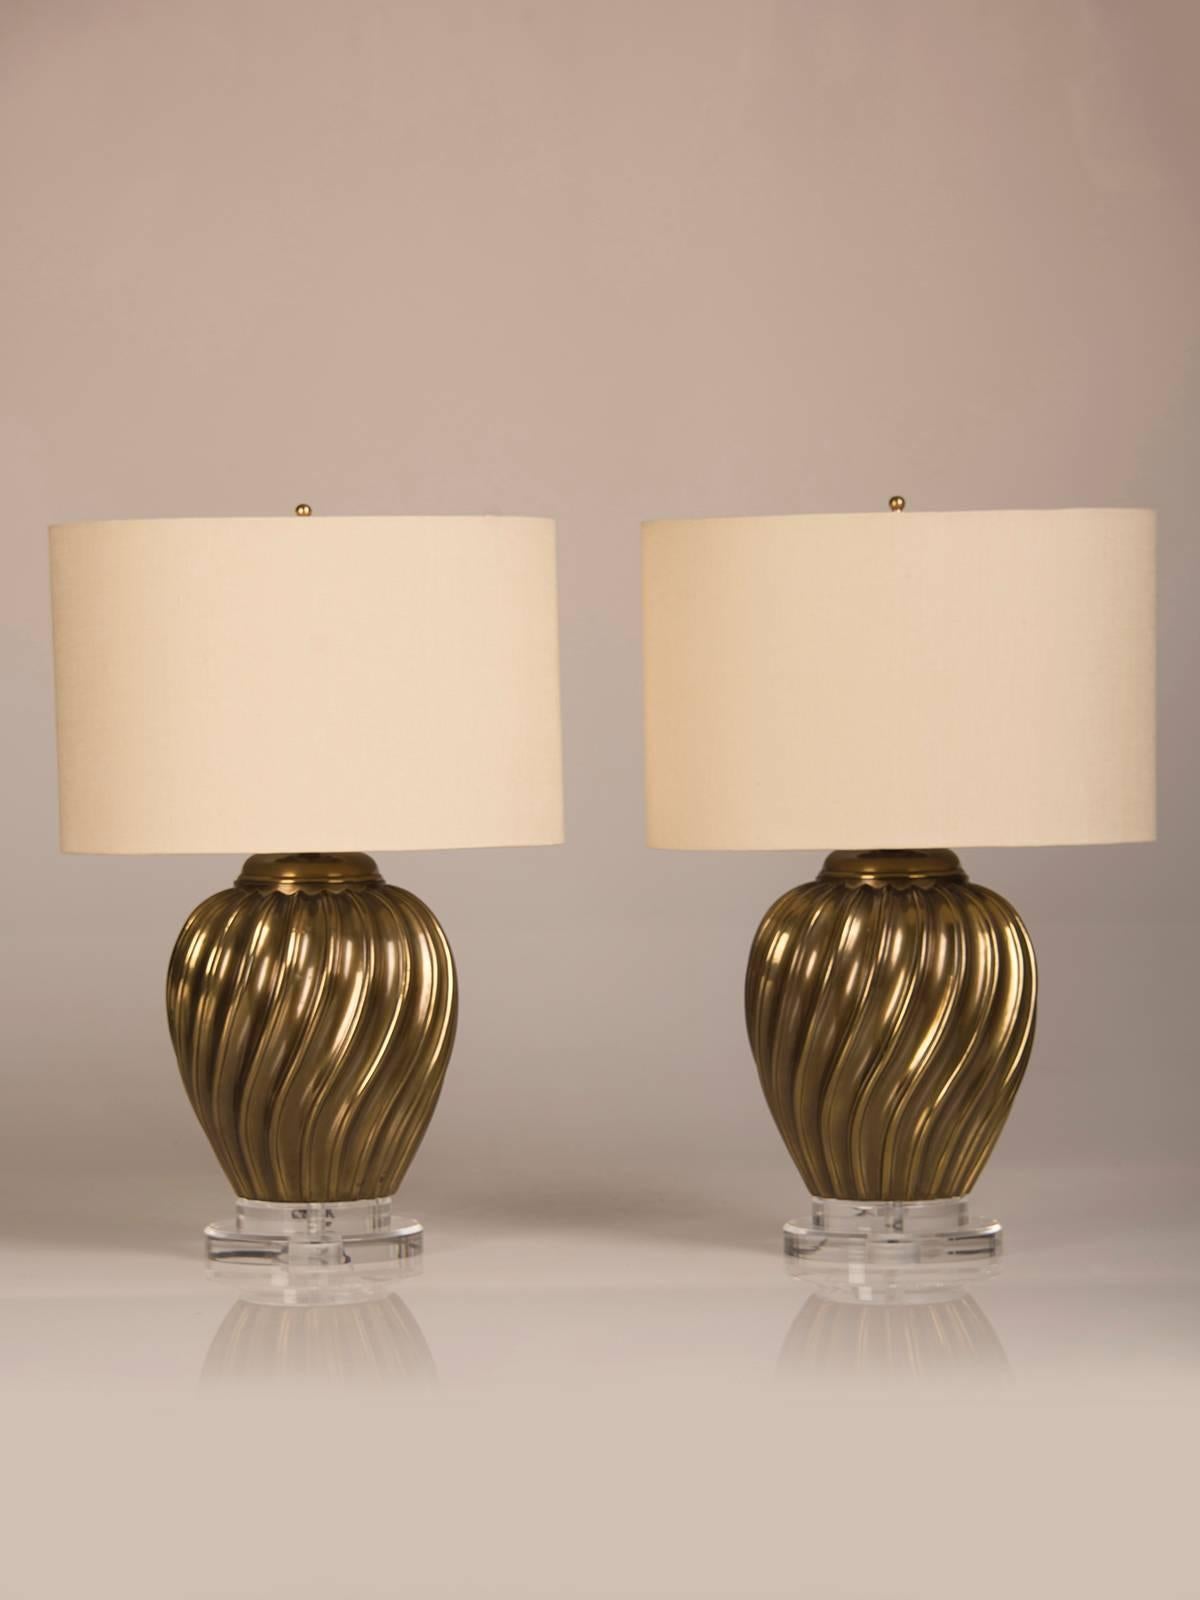 Receive our new selections direct from 1stdibs by email each week. Please click Follow Dealer below and see them first!

A pair of vintage Italian brass swirl vases now mounted as lamps circa 1950. The combination of the lustrous gleam of the